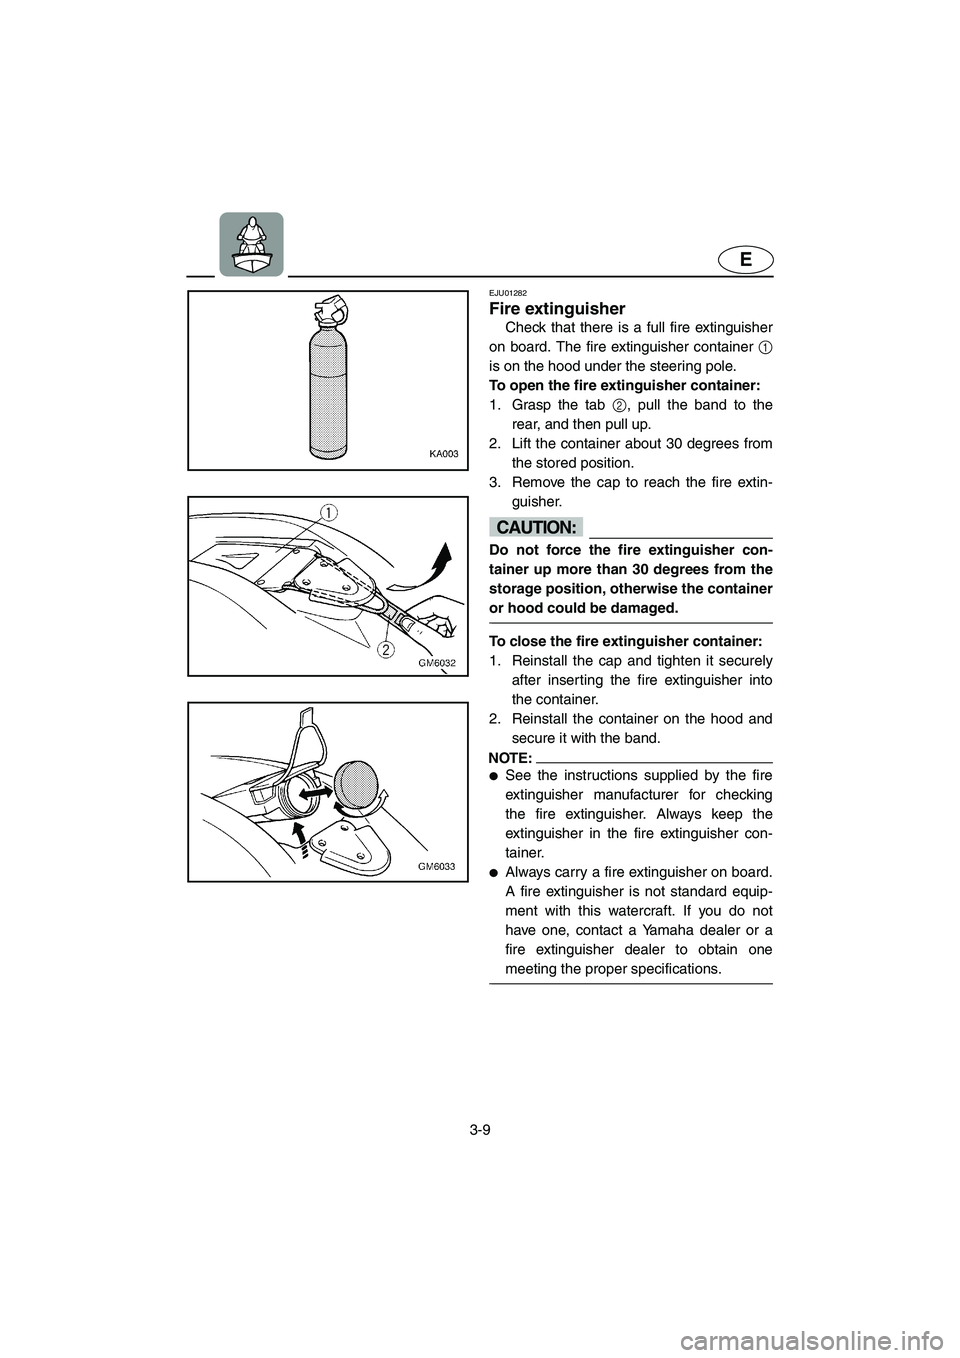 YAMAHA SUPERJET 2002  Owners Manual 3-9
E
EJU01282 
Fire extinguisher  
Check that there is a full fire extinguisher
on board. The fire extinguisher container 1
is on the hood under the steering pole. 
To open the fire extinguisher cont